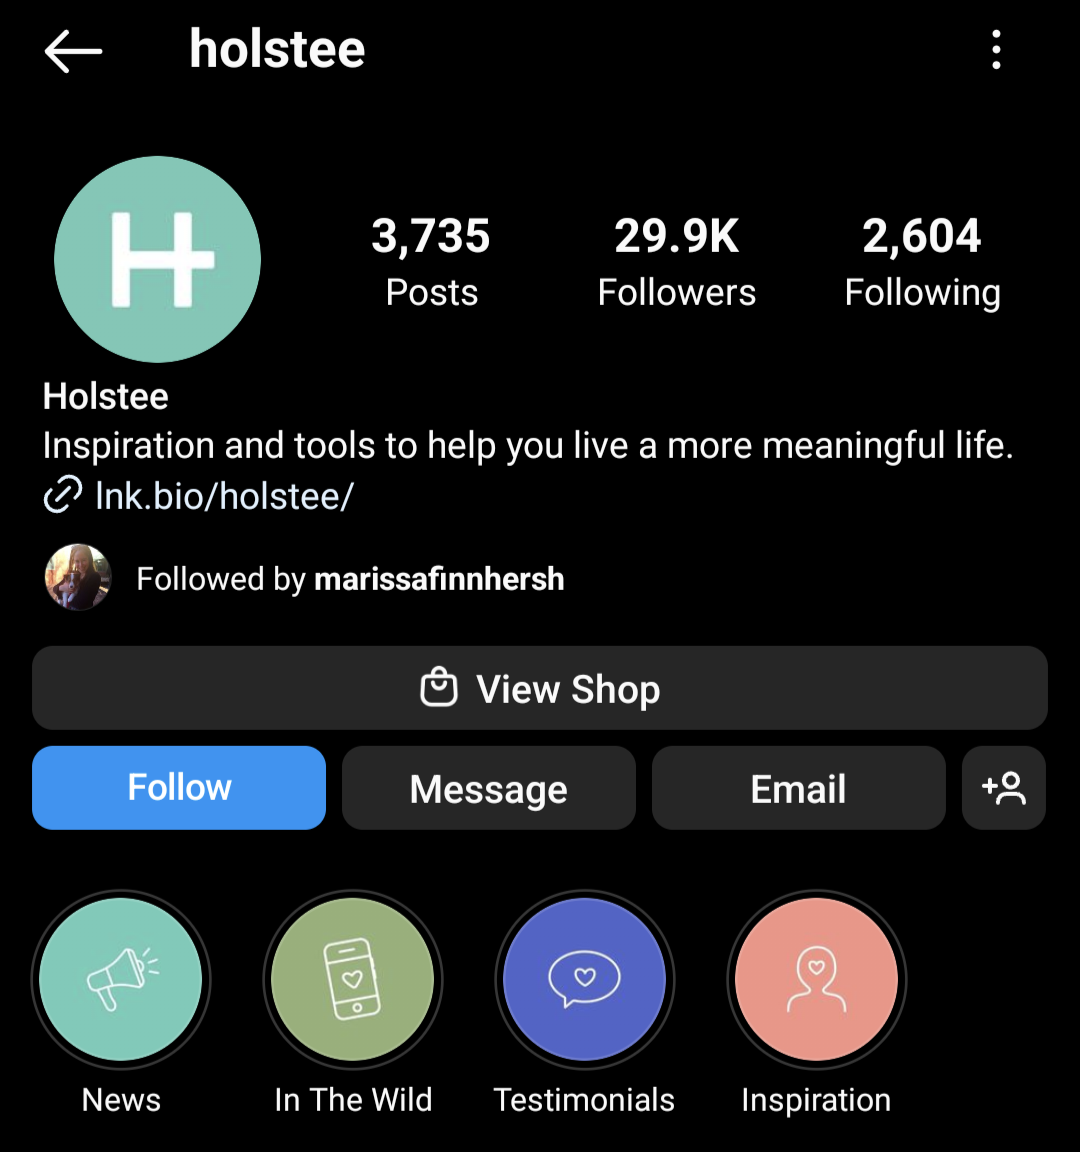 Holstee has a bright and playful Instagram bio with use of emojis